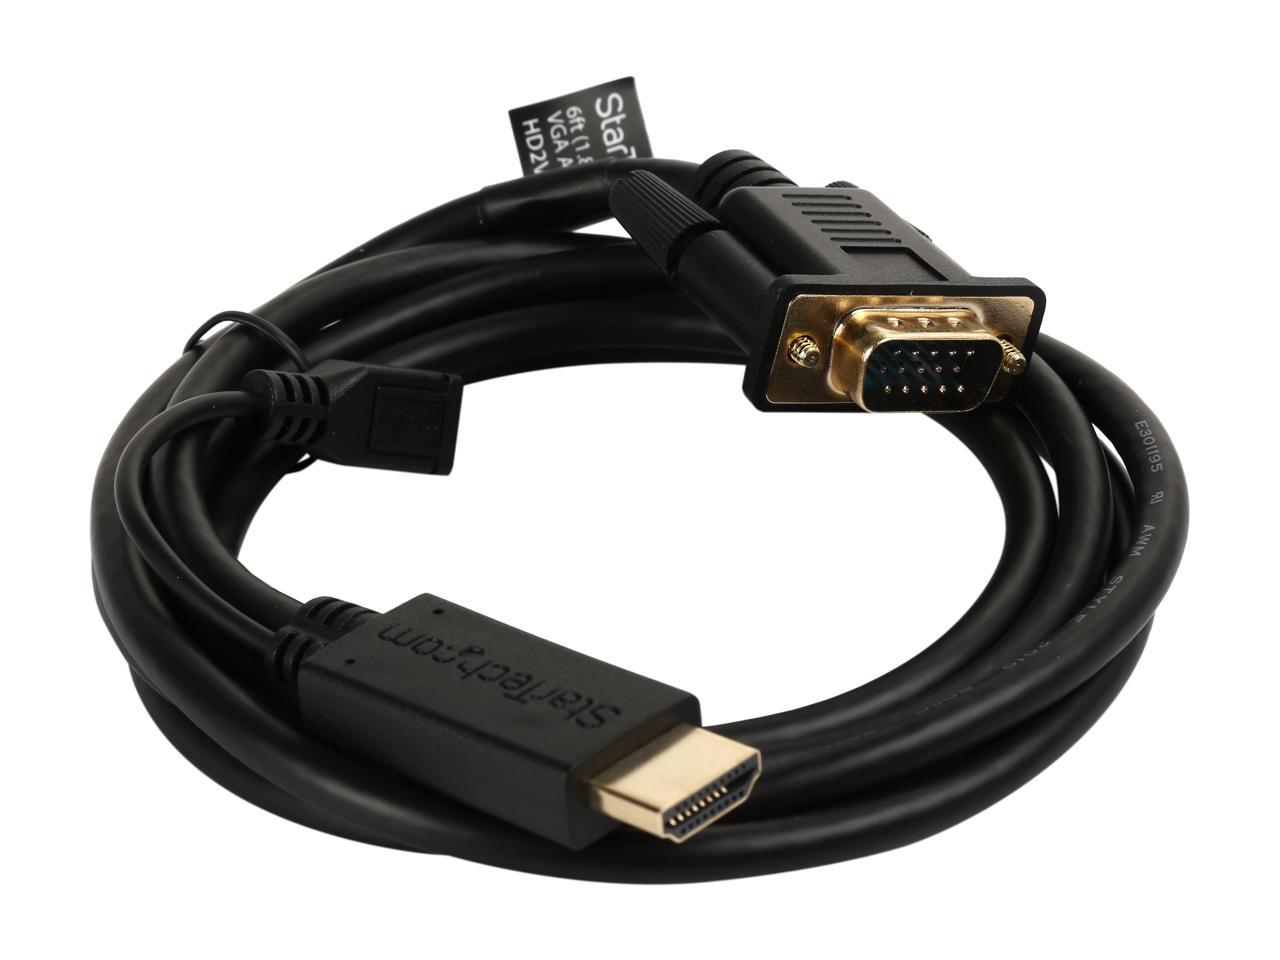 StarTech.com HD2VGAMM6 HDMI to VGA Cable - 6 ft / 2m - 1080p - 1920 x 1200 - Active HDMI Cable - Monitor Cable - Computer Cable